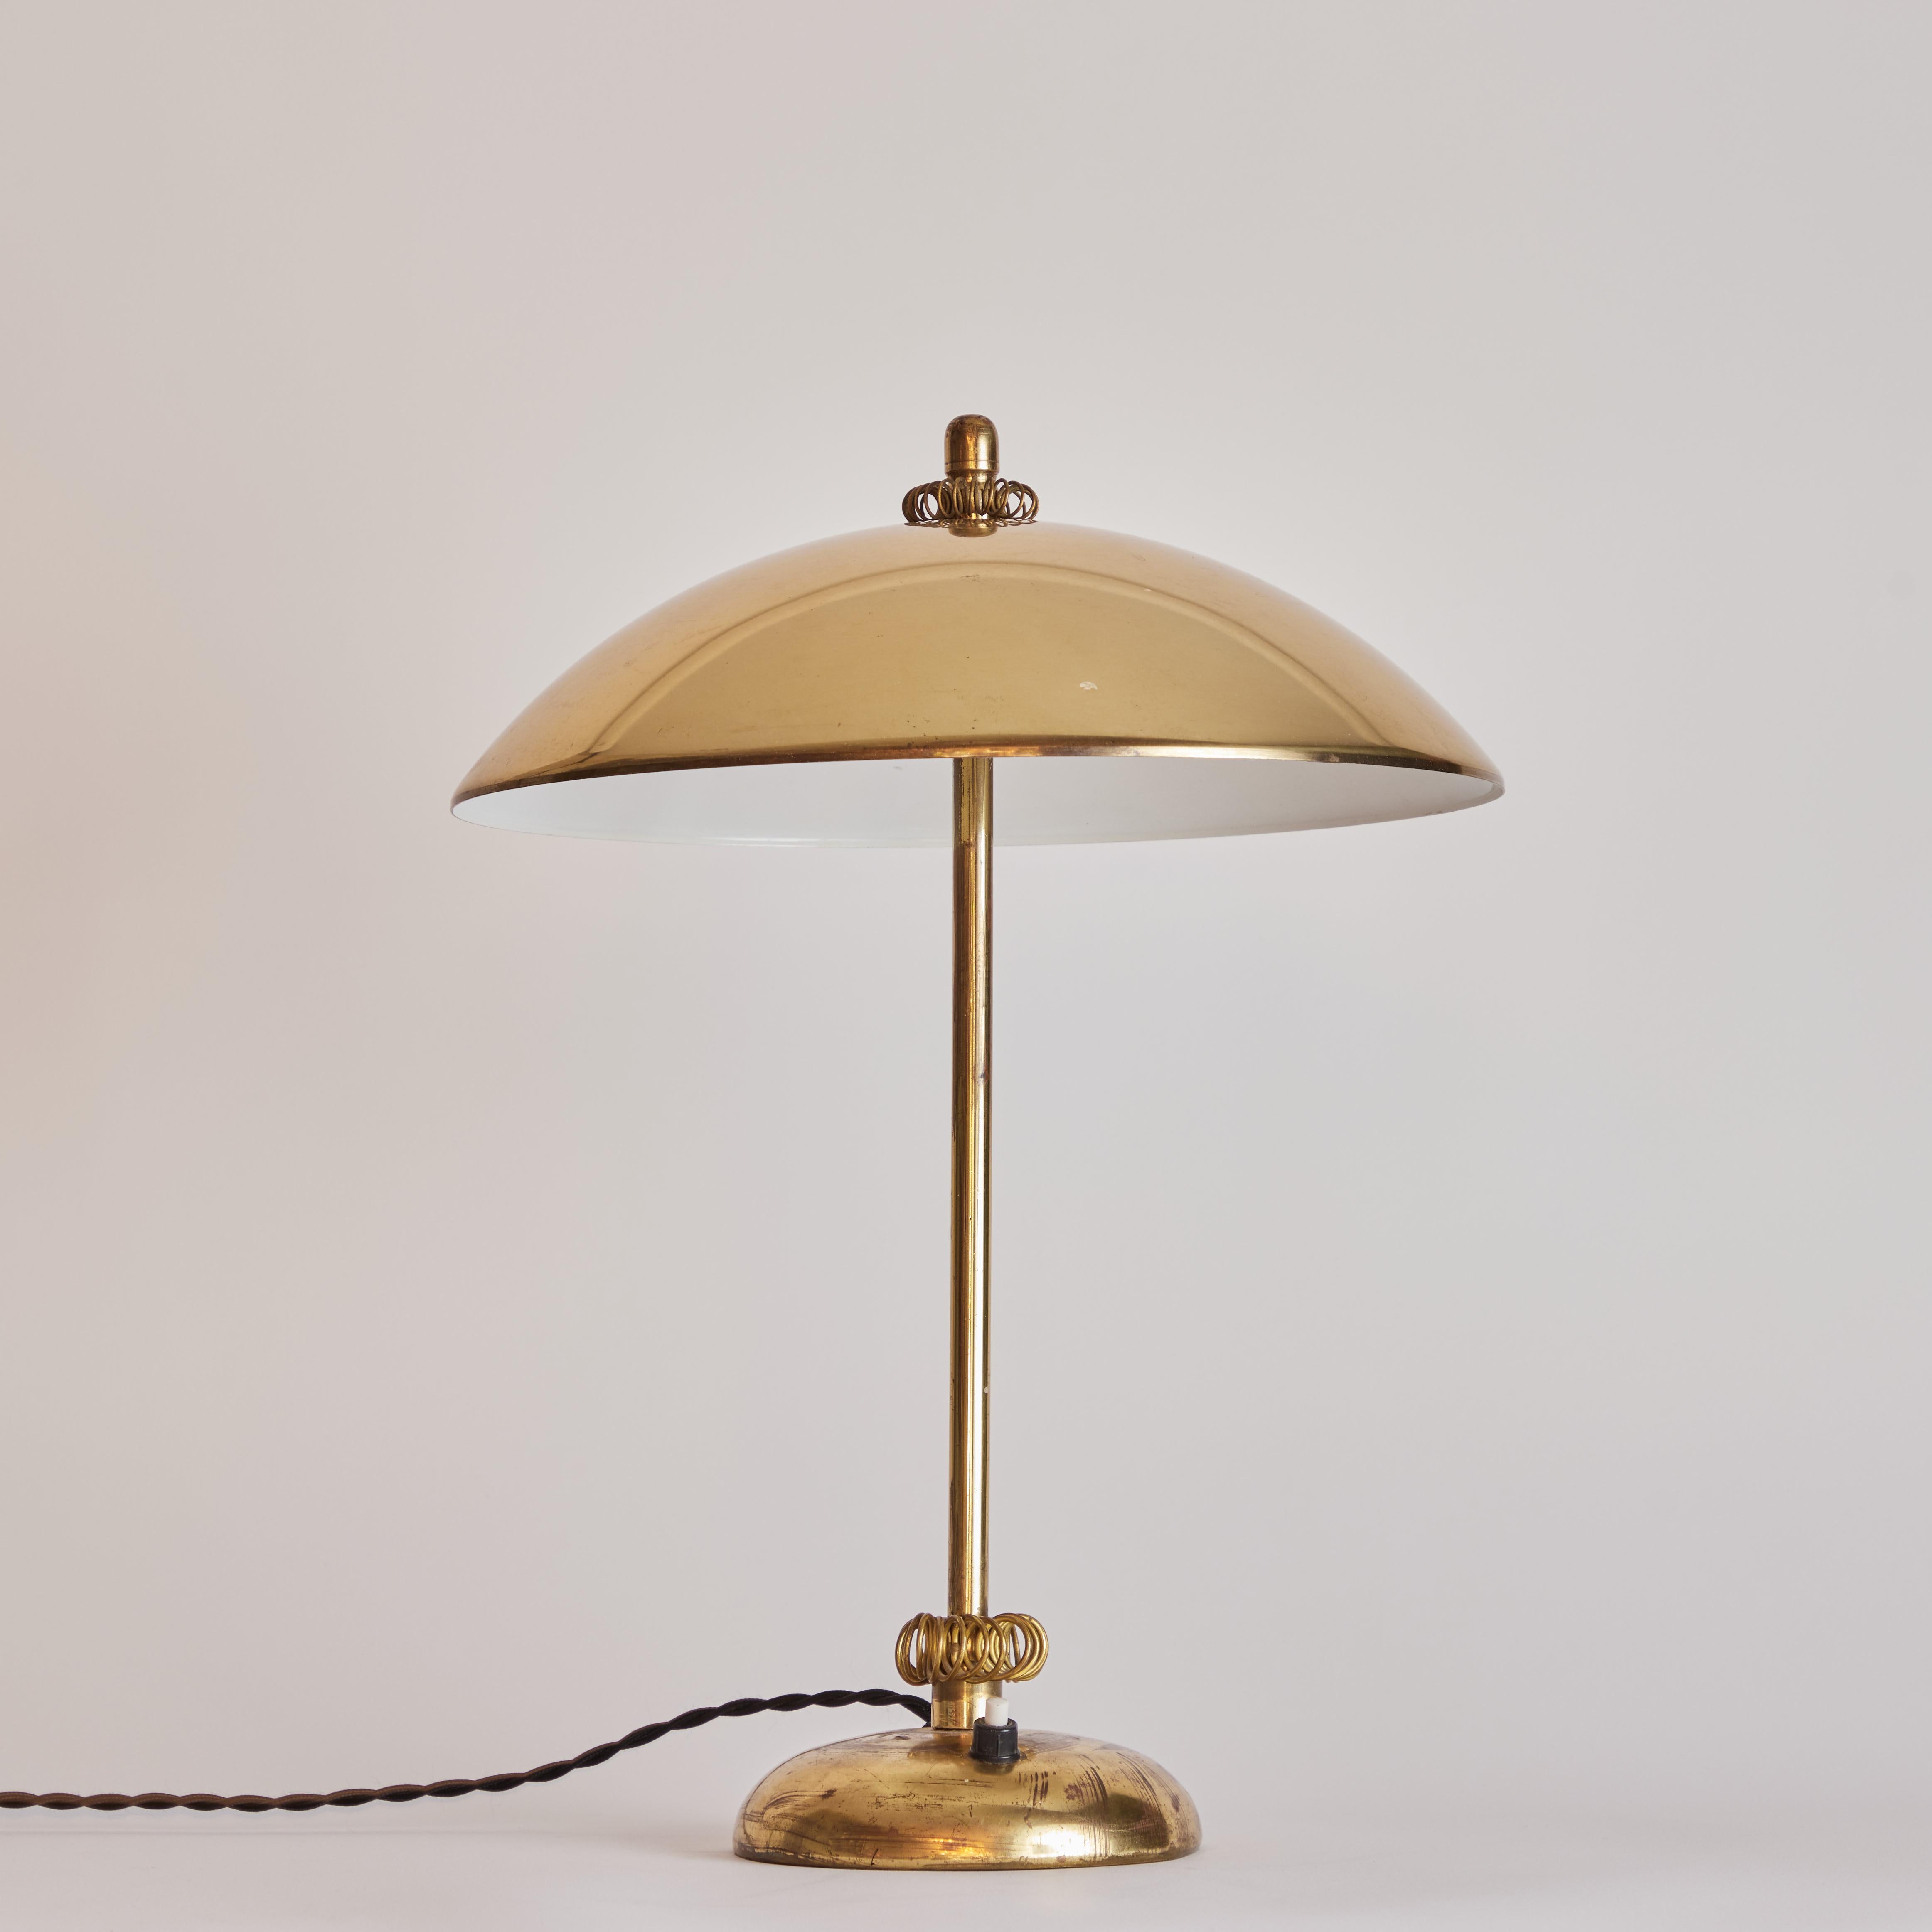 Scandinavian Modern 1950s Finnish Brass Table Lamp Attributed to Paavo Tynell